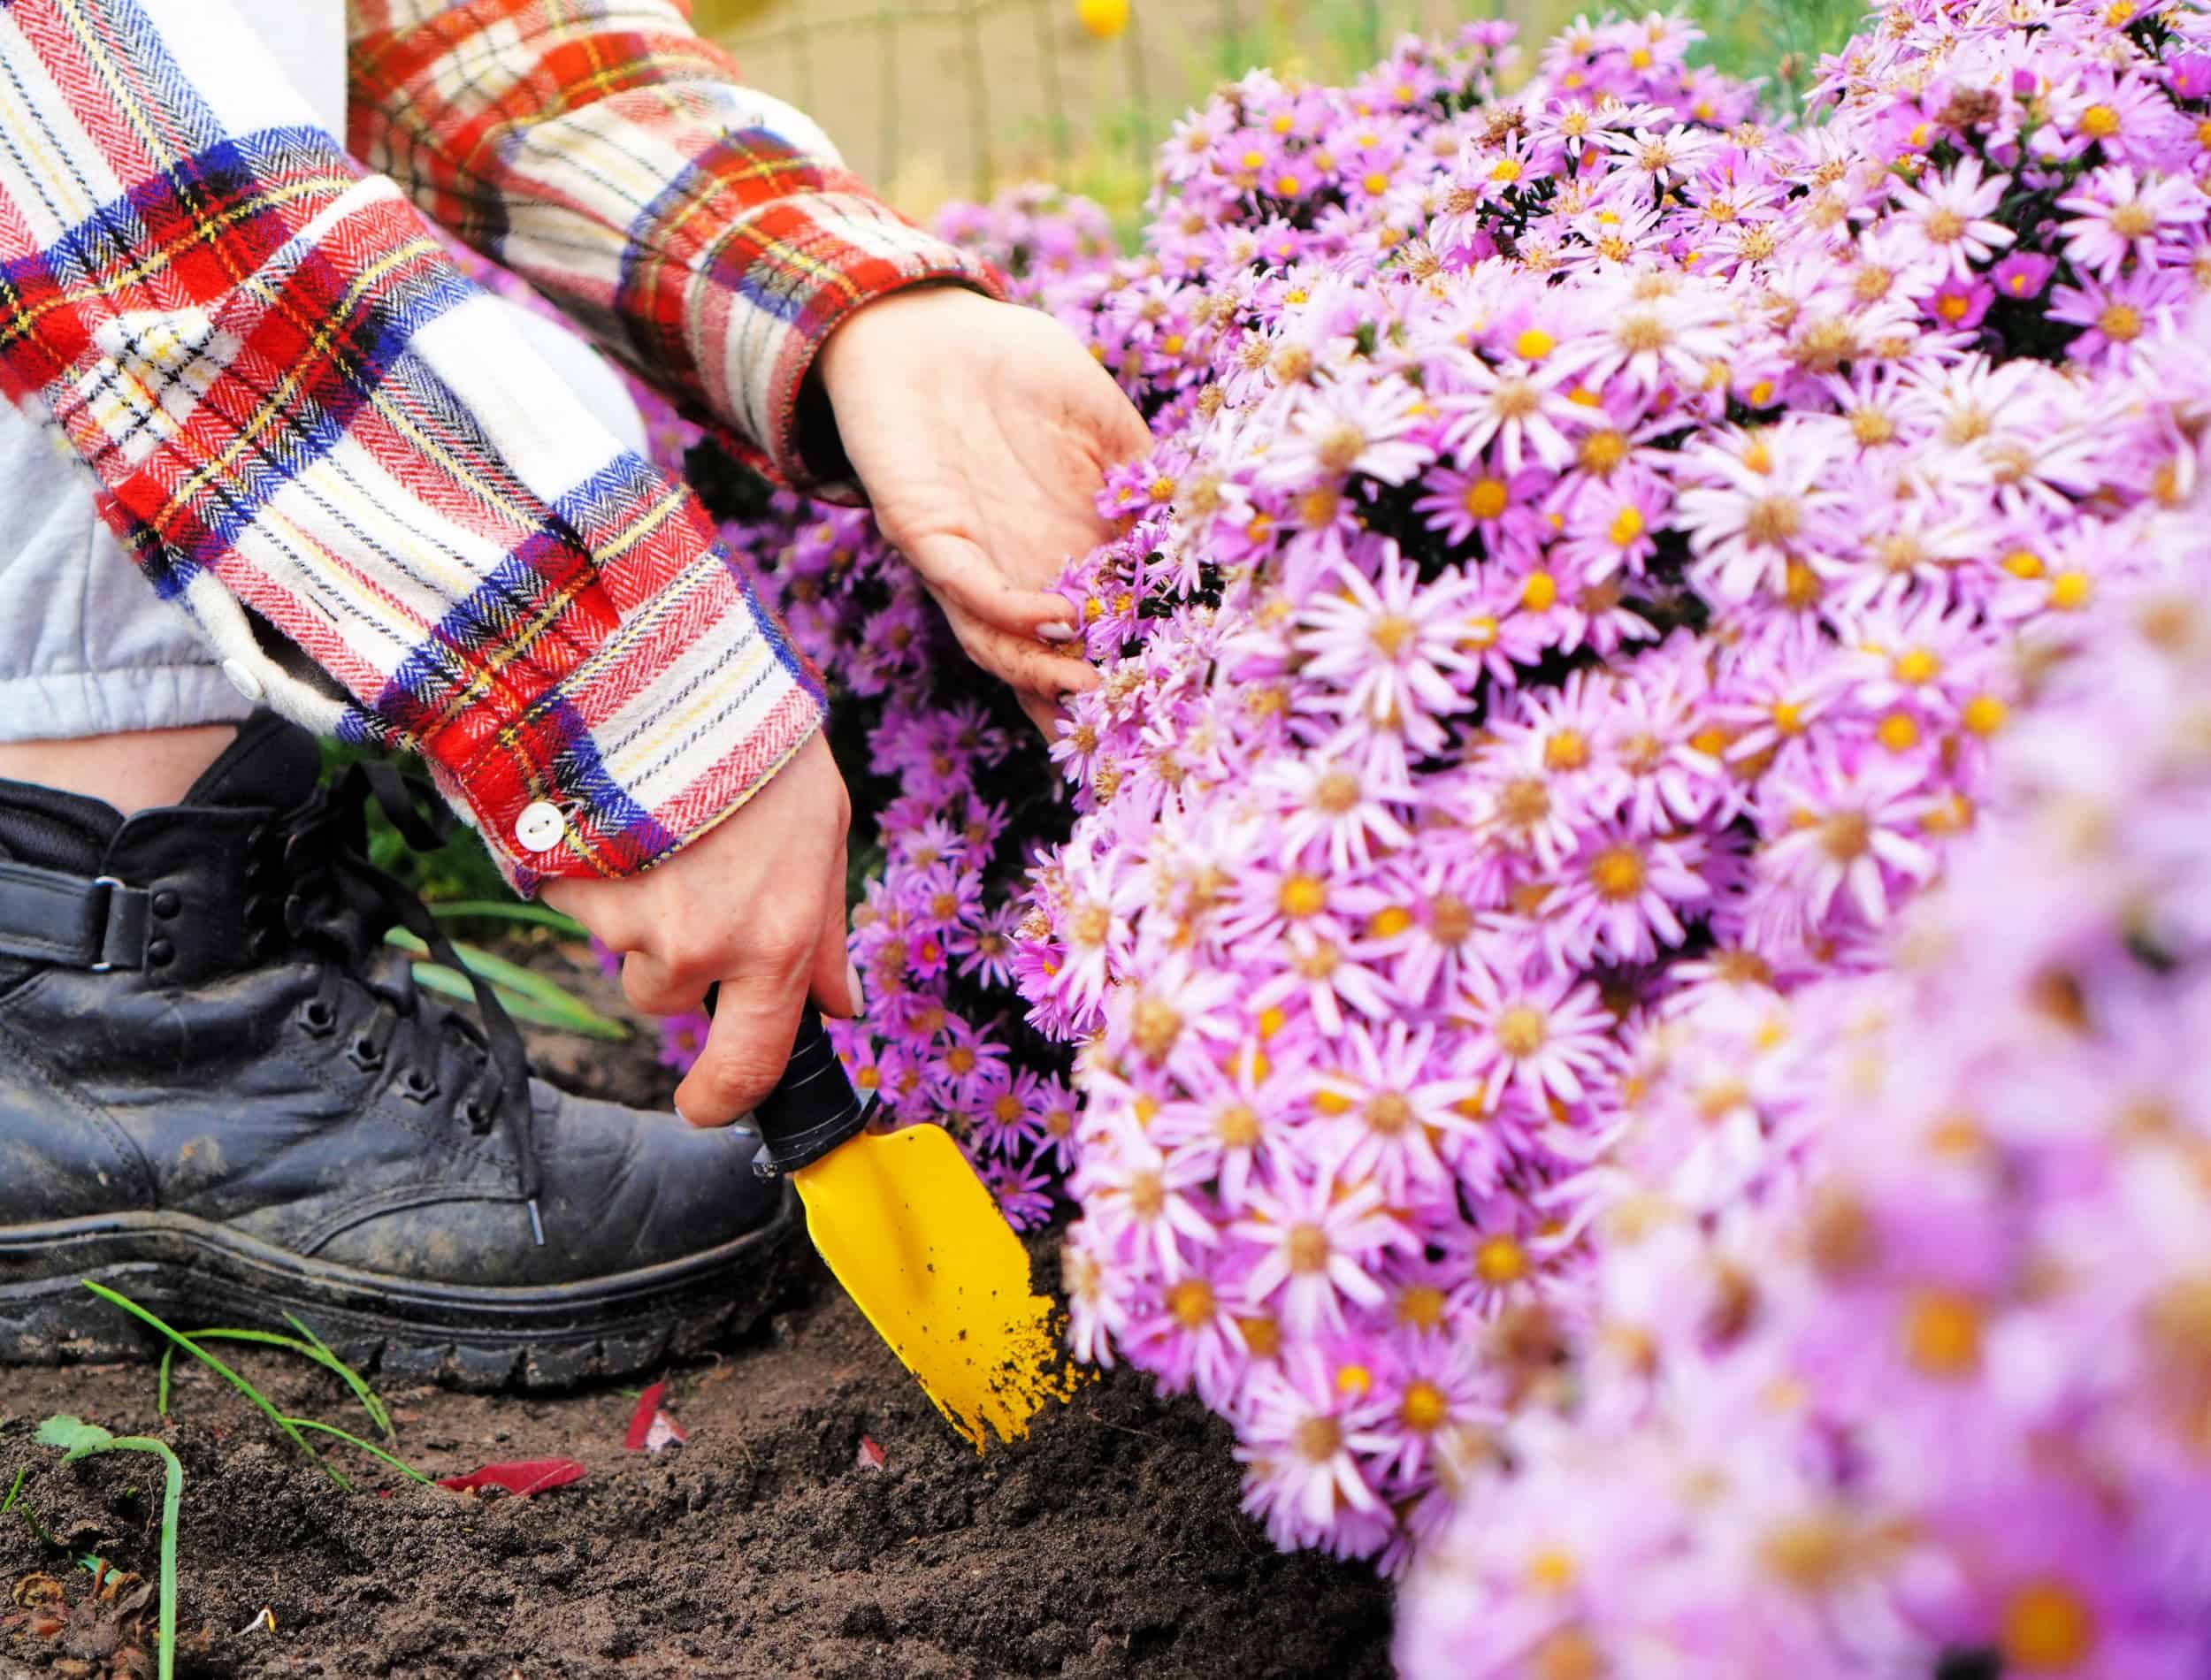 Girl in country clothes digs up the soil with a little shovel around the autumn aster flowers.